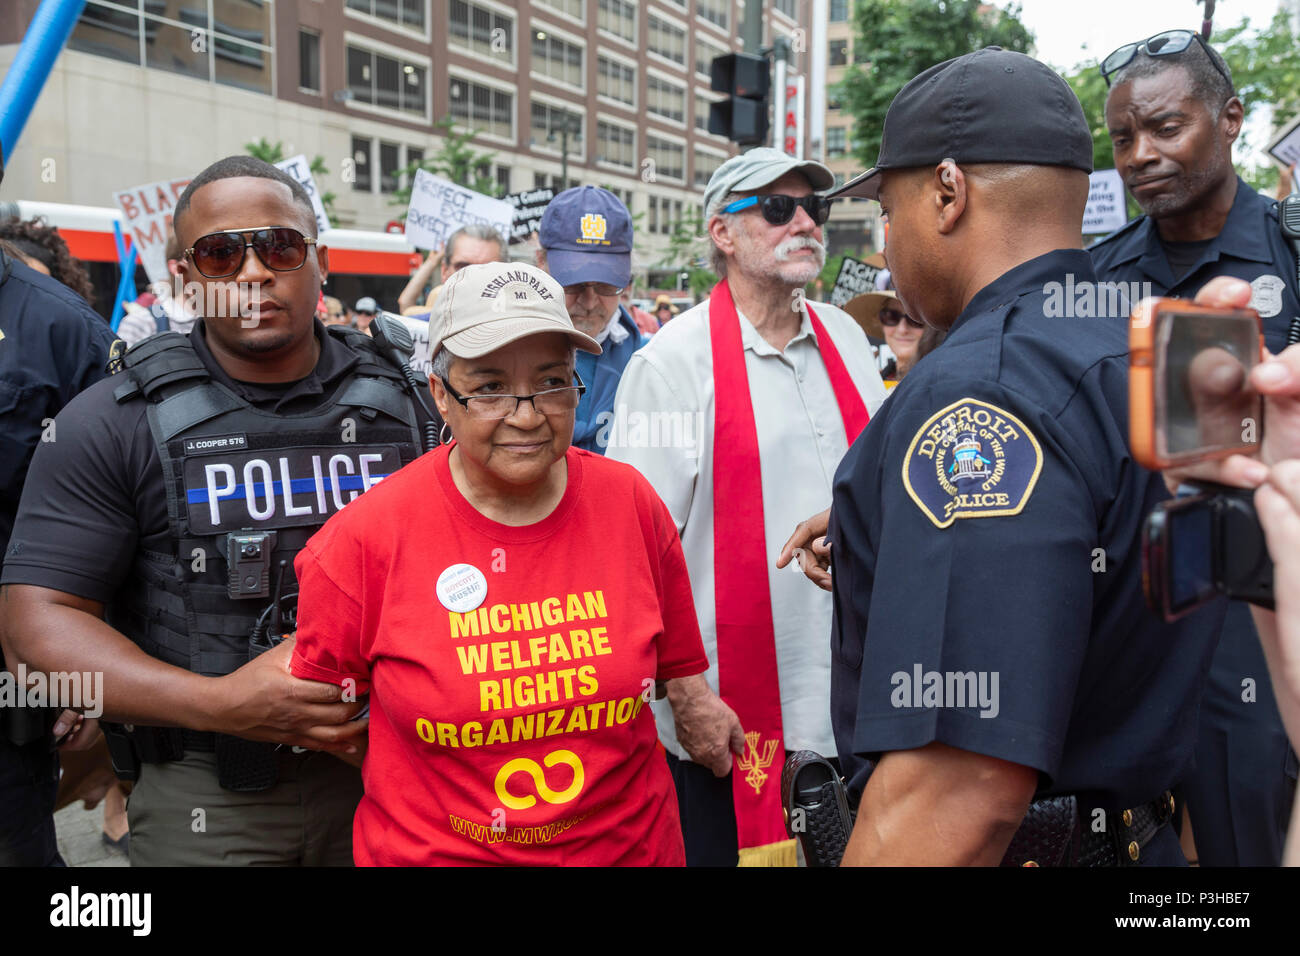 Detroit, Michigan USA - 18 June 2018 - Several hundred people rallied in Detroit to support the Poor Peoples Campaign against poverty, racism, militarism, and ecological devastation. A member of the Michigan Welfare Rights Organization was among two dozen arrested for blocking the QLine streetcar to highlight the need for better public transportation in Detroit. Credit: Jim West/Alamy Live News Stock Photo